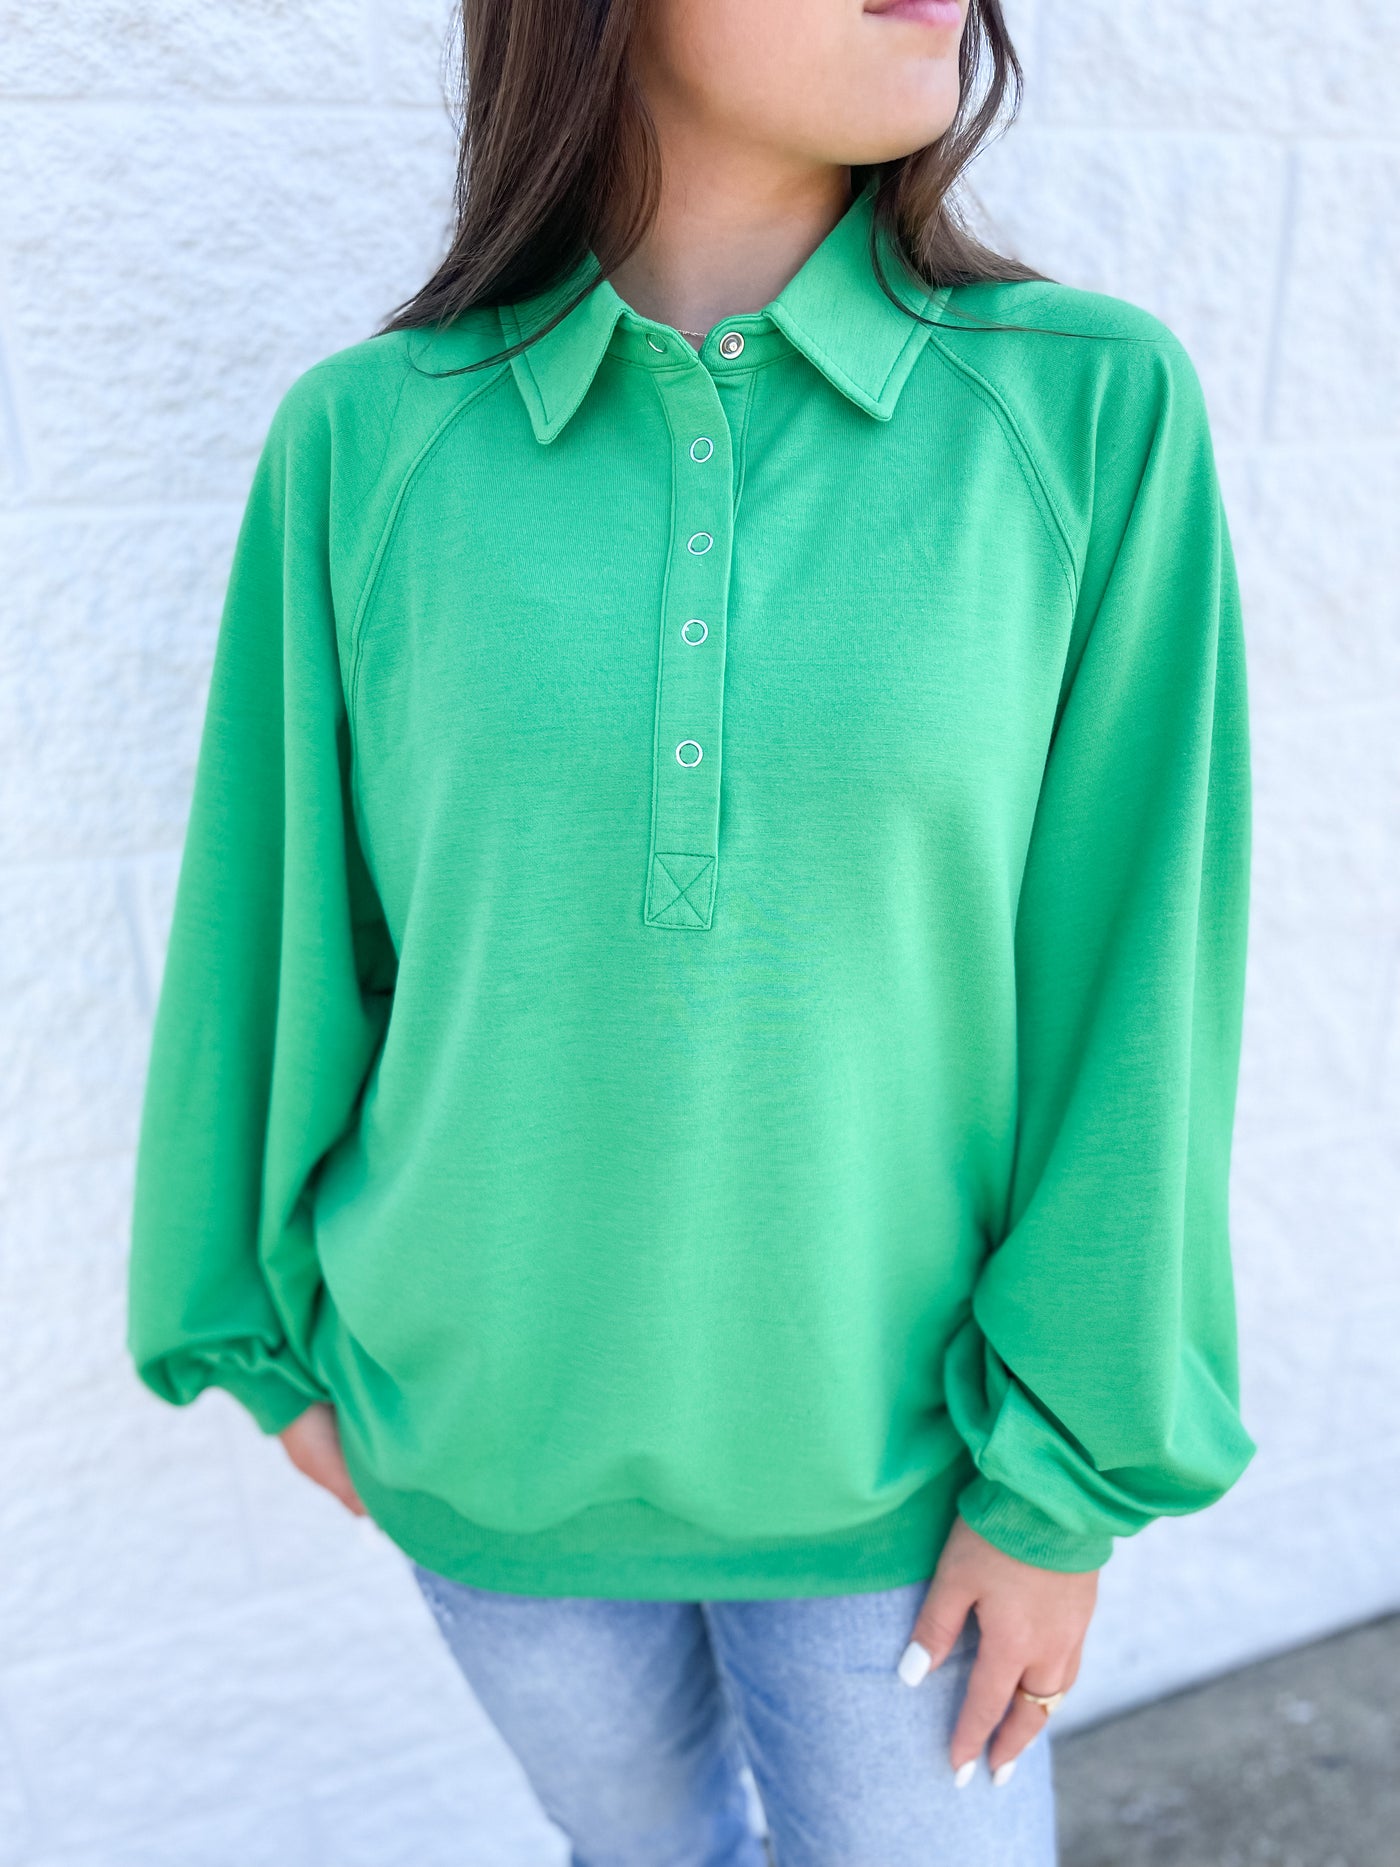 Green Carly Top